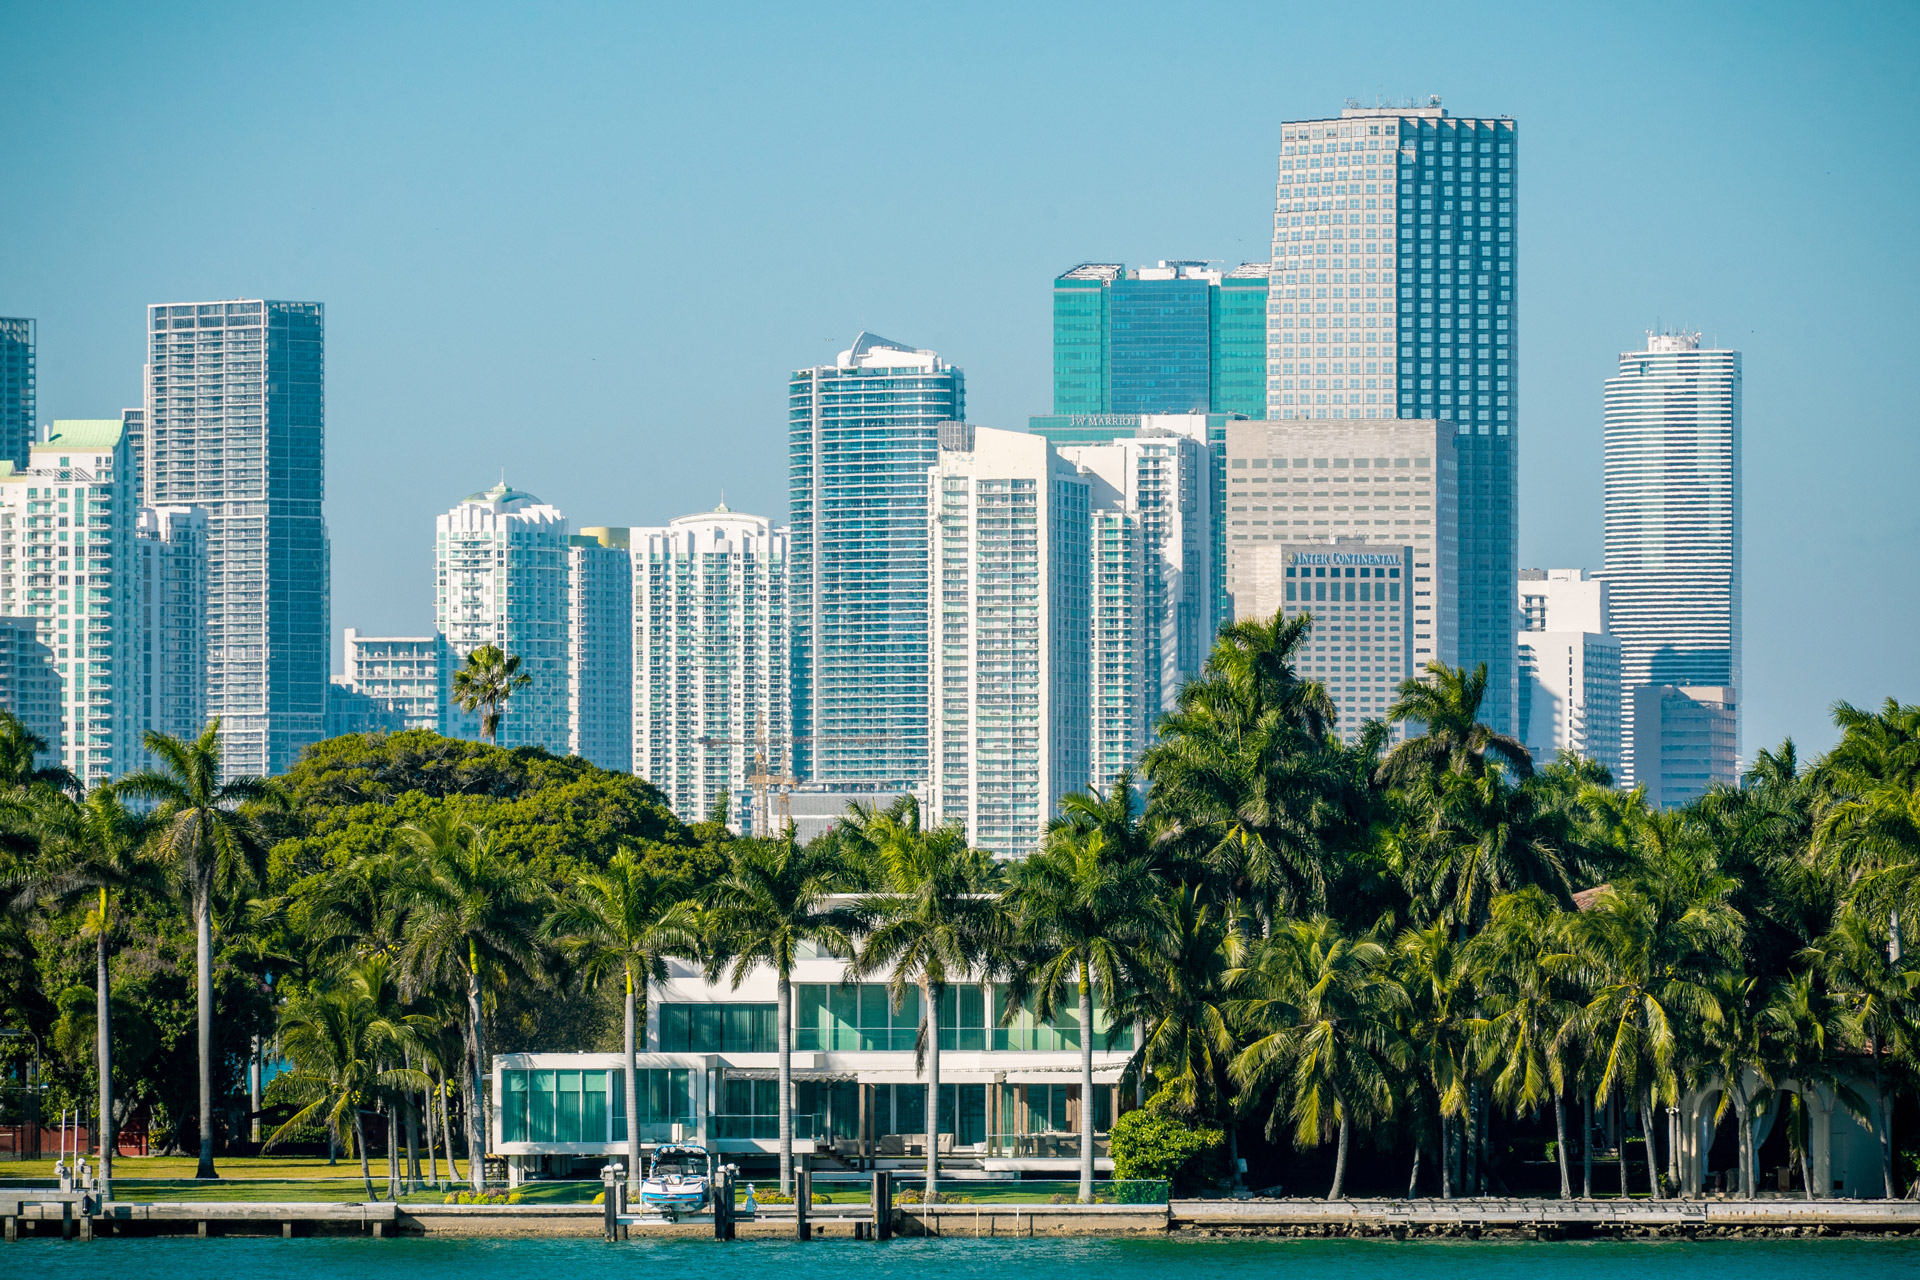 Why is now the best time to invest in real estate in Miami?